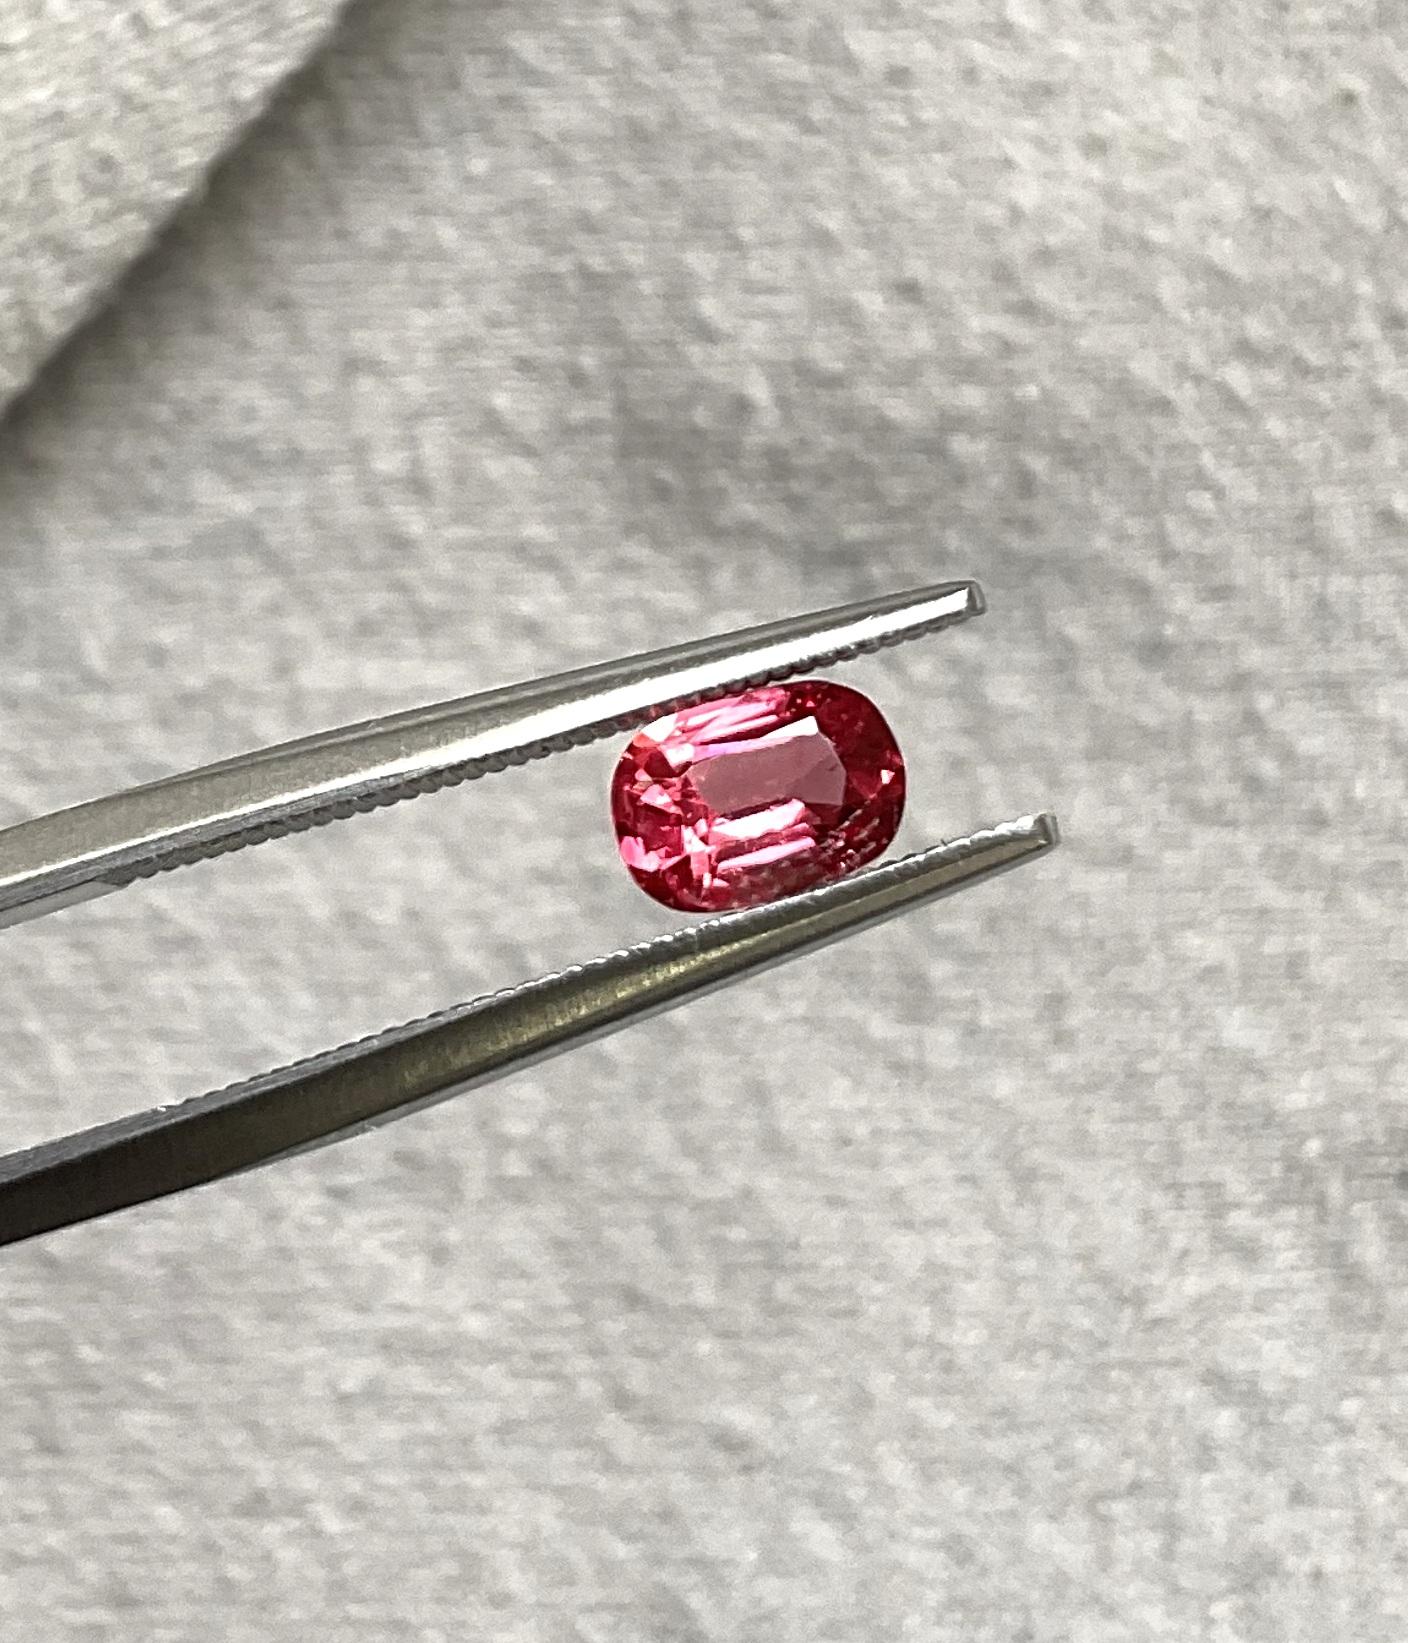 Cushion Cut Certified 0.74 Carat vivid orangy red Burmese spinel cutstone natural gem spinel